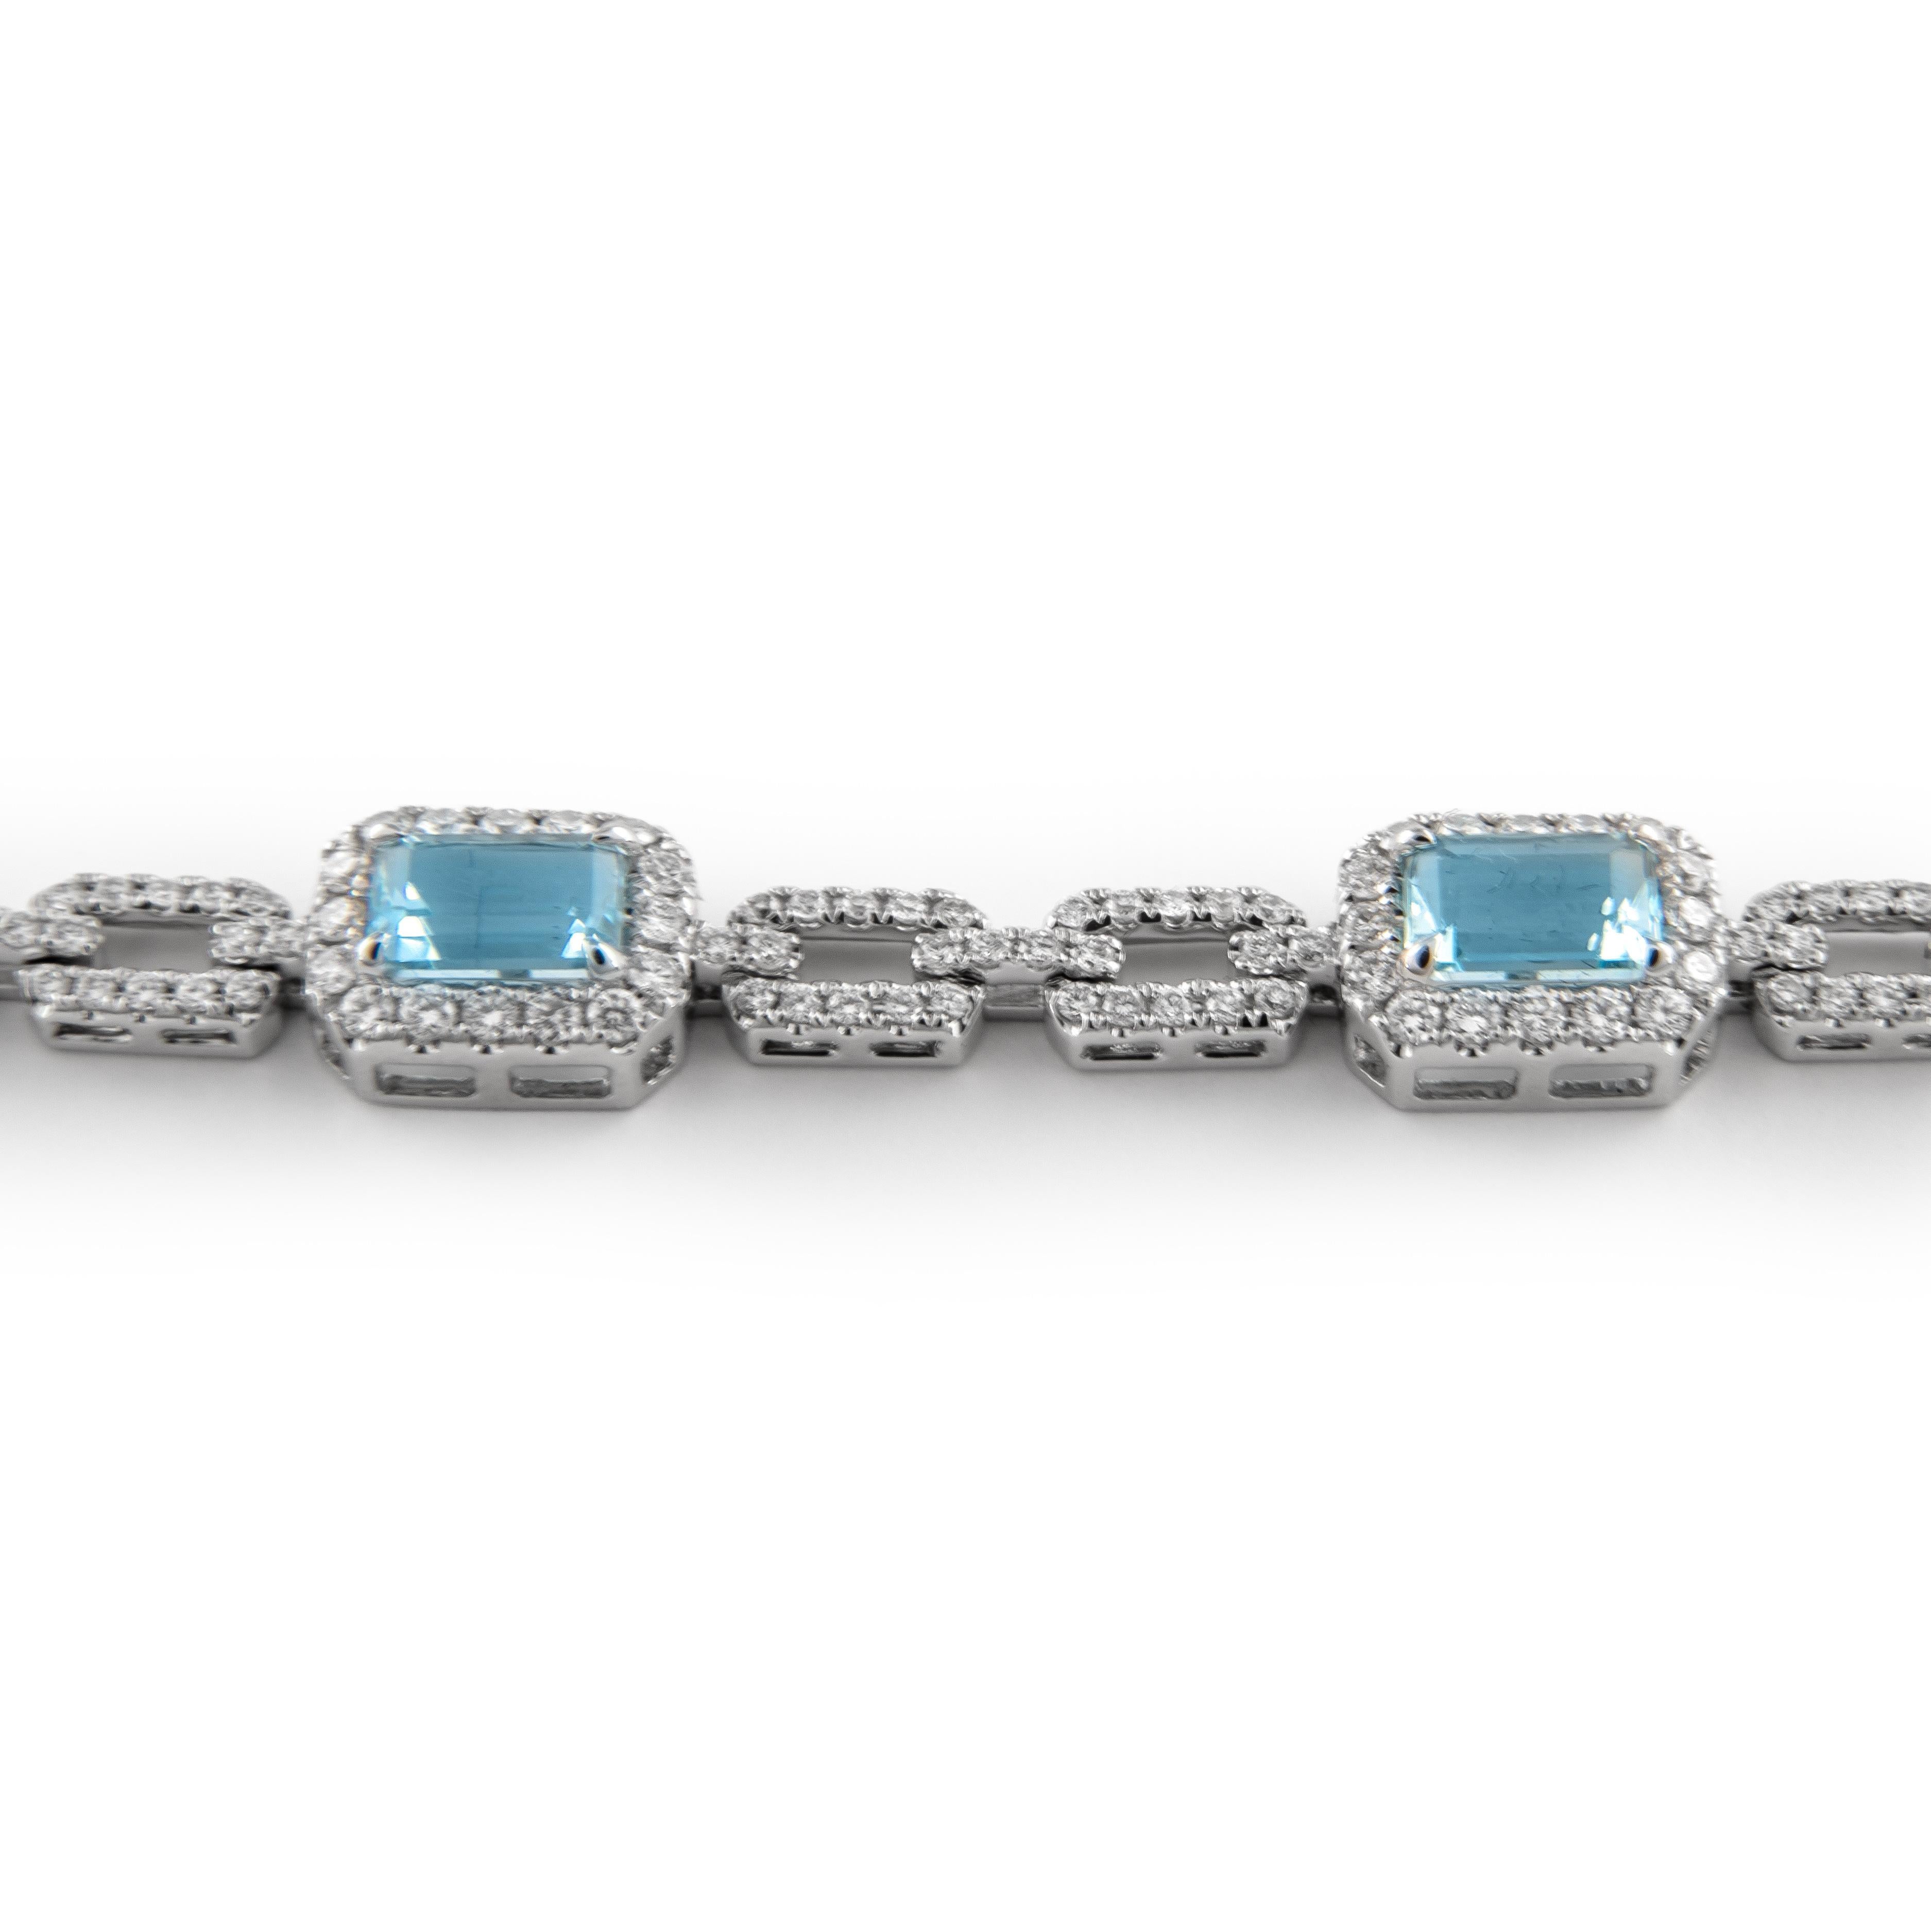 Exquisite modern aquamarine and diamond bracelet, by Alexander Beverly Hills.
5.71 carats total gemstone weight.
7 emerald cut aquamarines, 3.90 carats. Complimented by 301 round brilliant diamonds, 1.81 carats. Approximately E/F color and VVS2/VS1